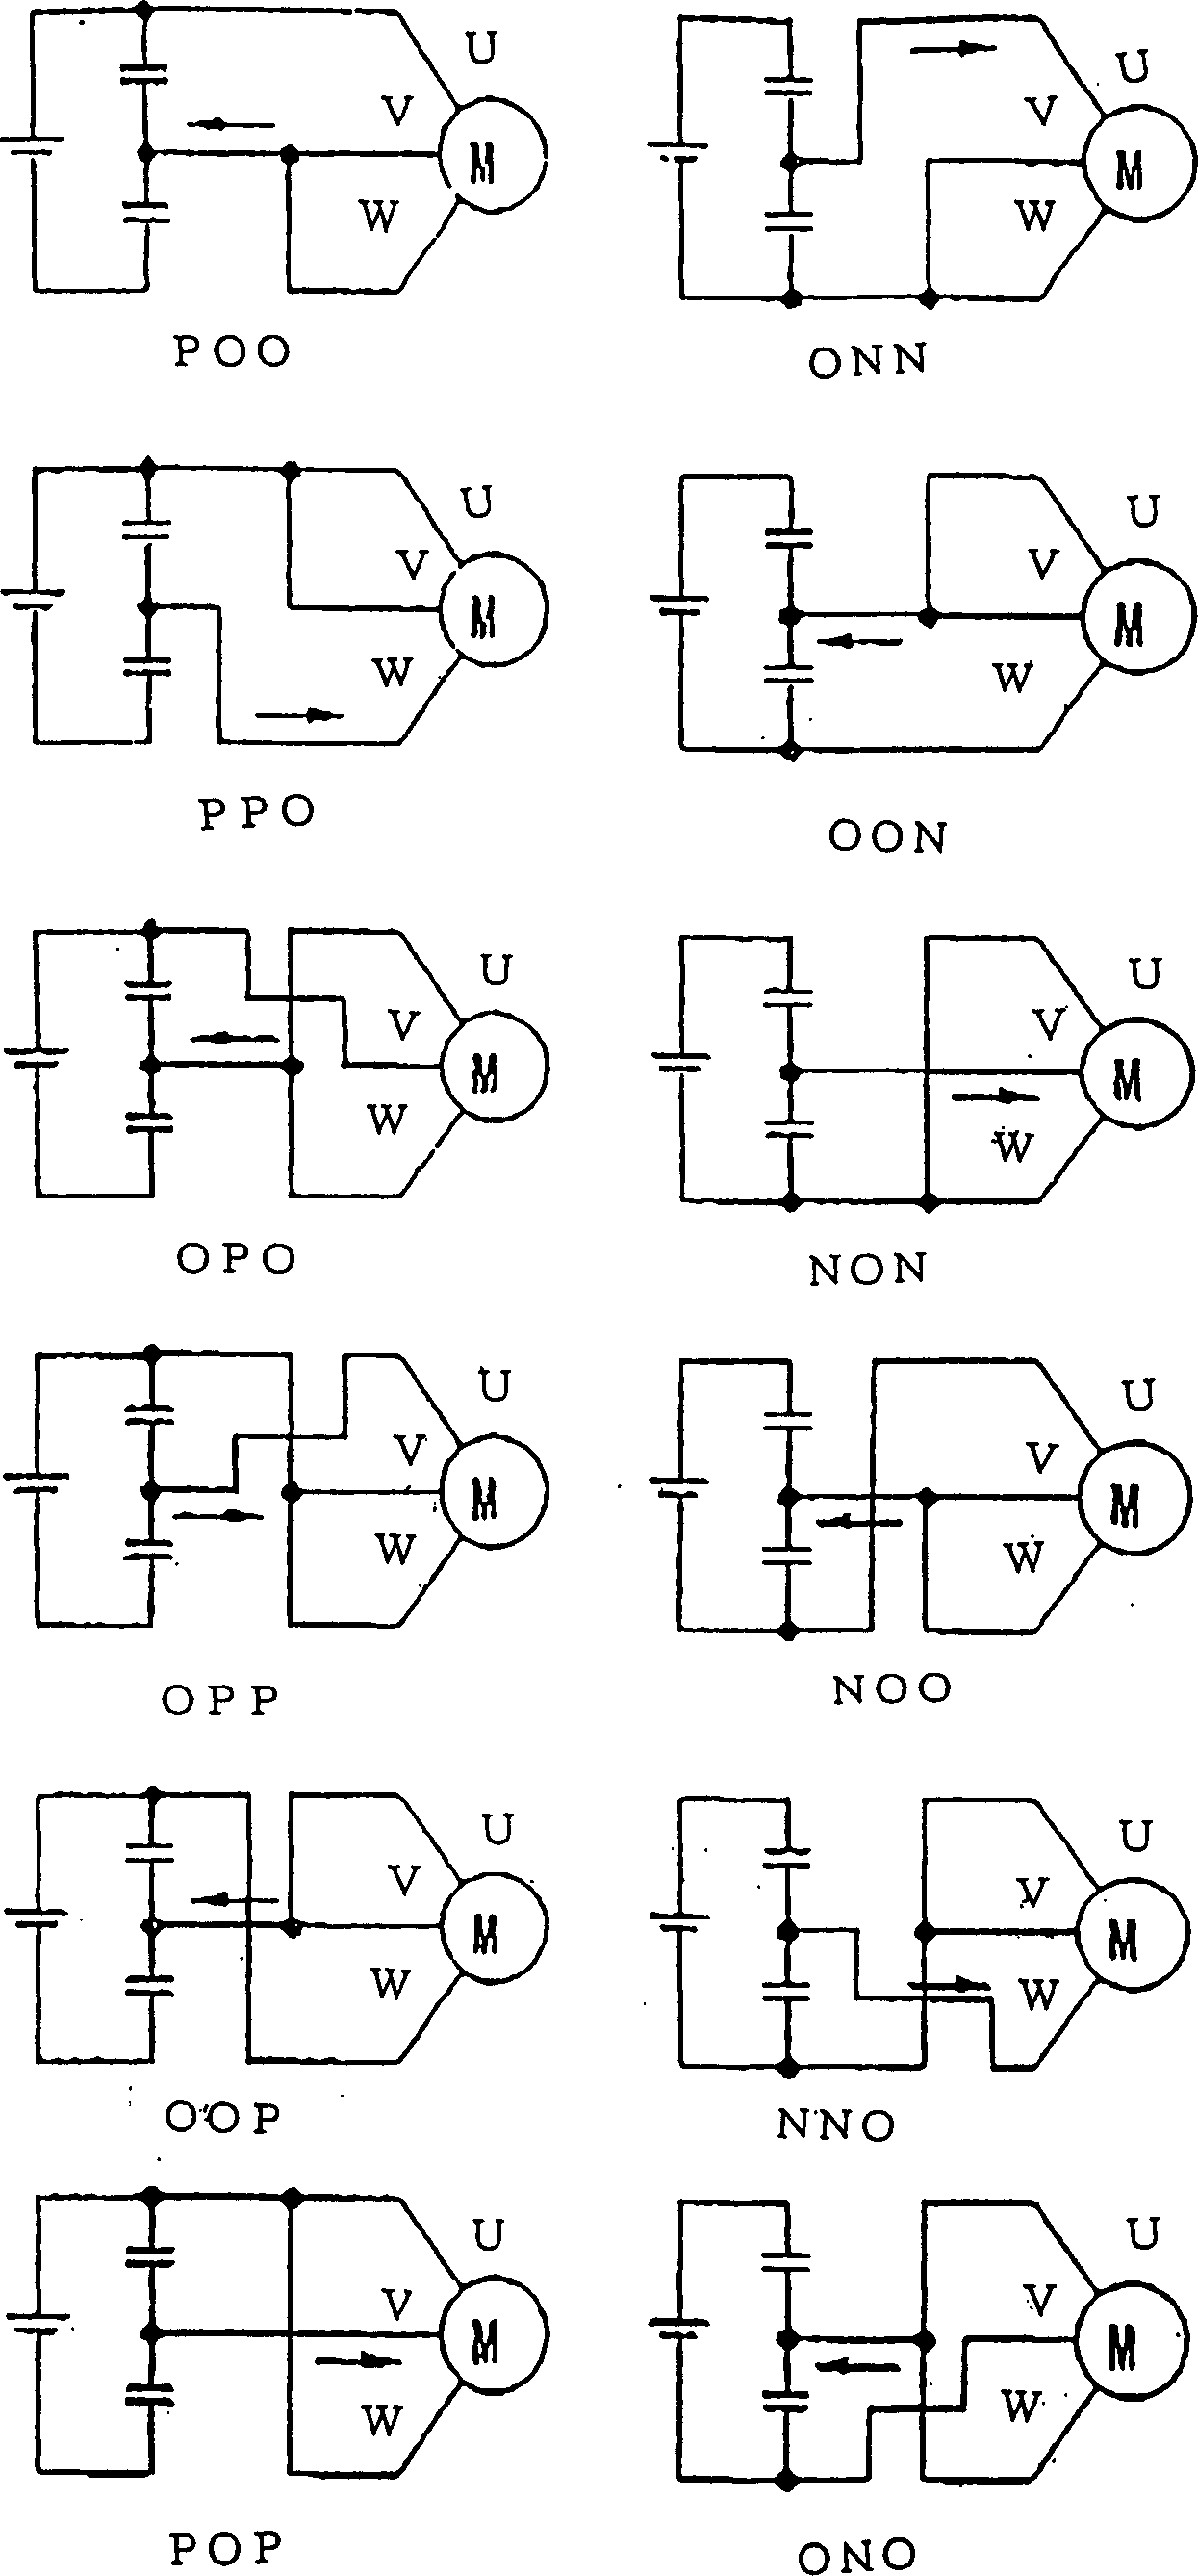 Three-level neutral point clamping PWM inverter and neutral point voltage controller